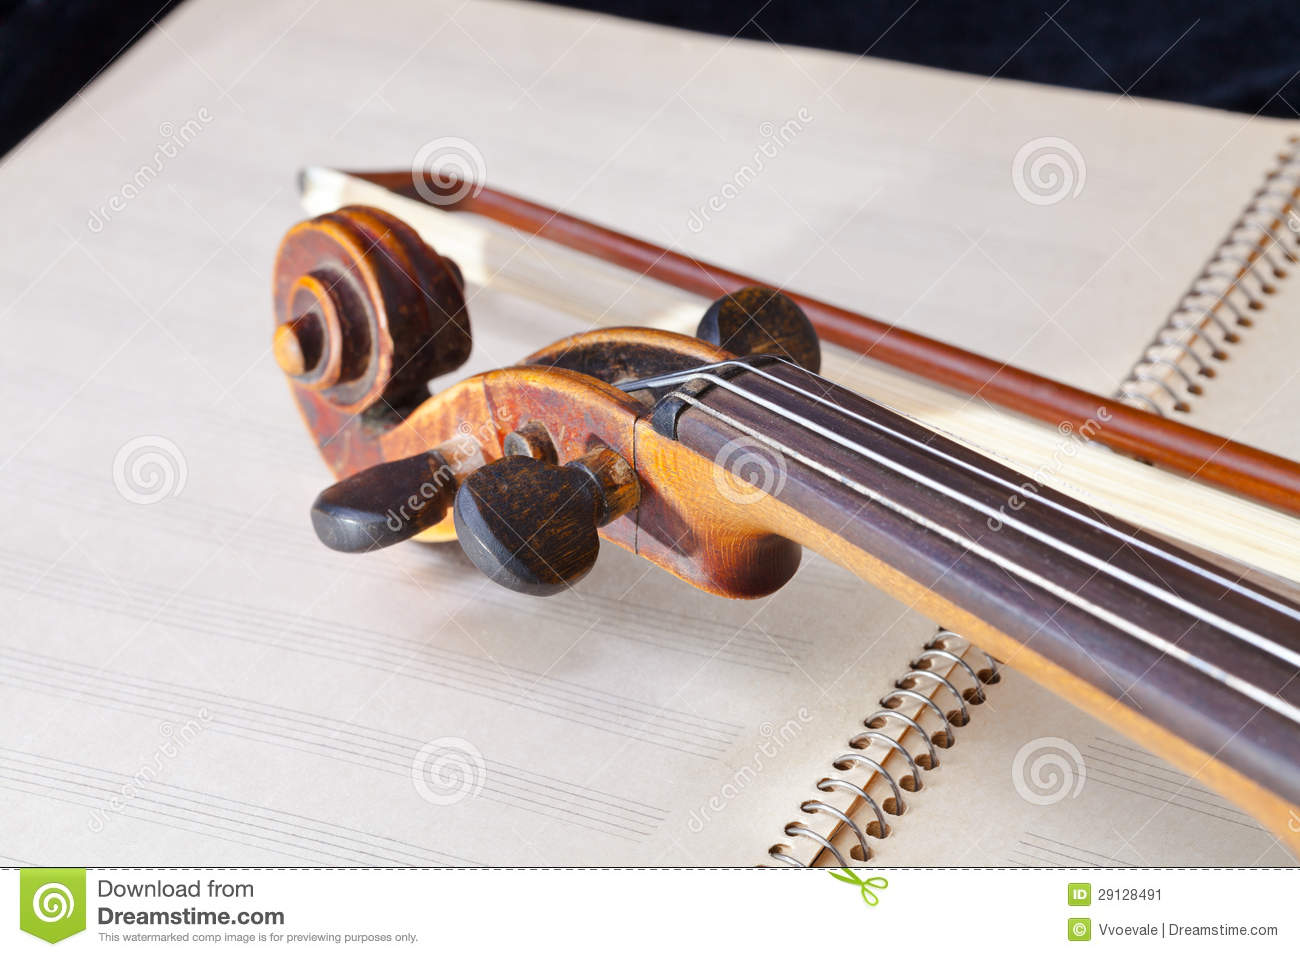 Violin Bow And Scroll On Music Book Stock Image   Image  29128491